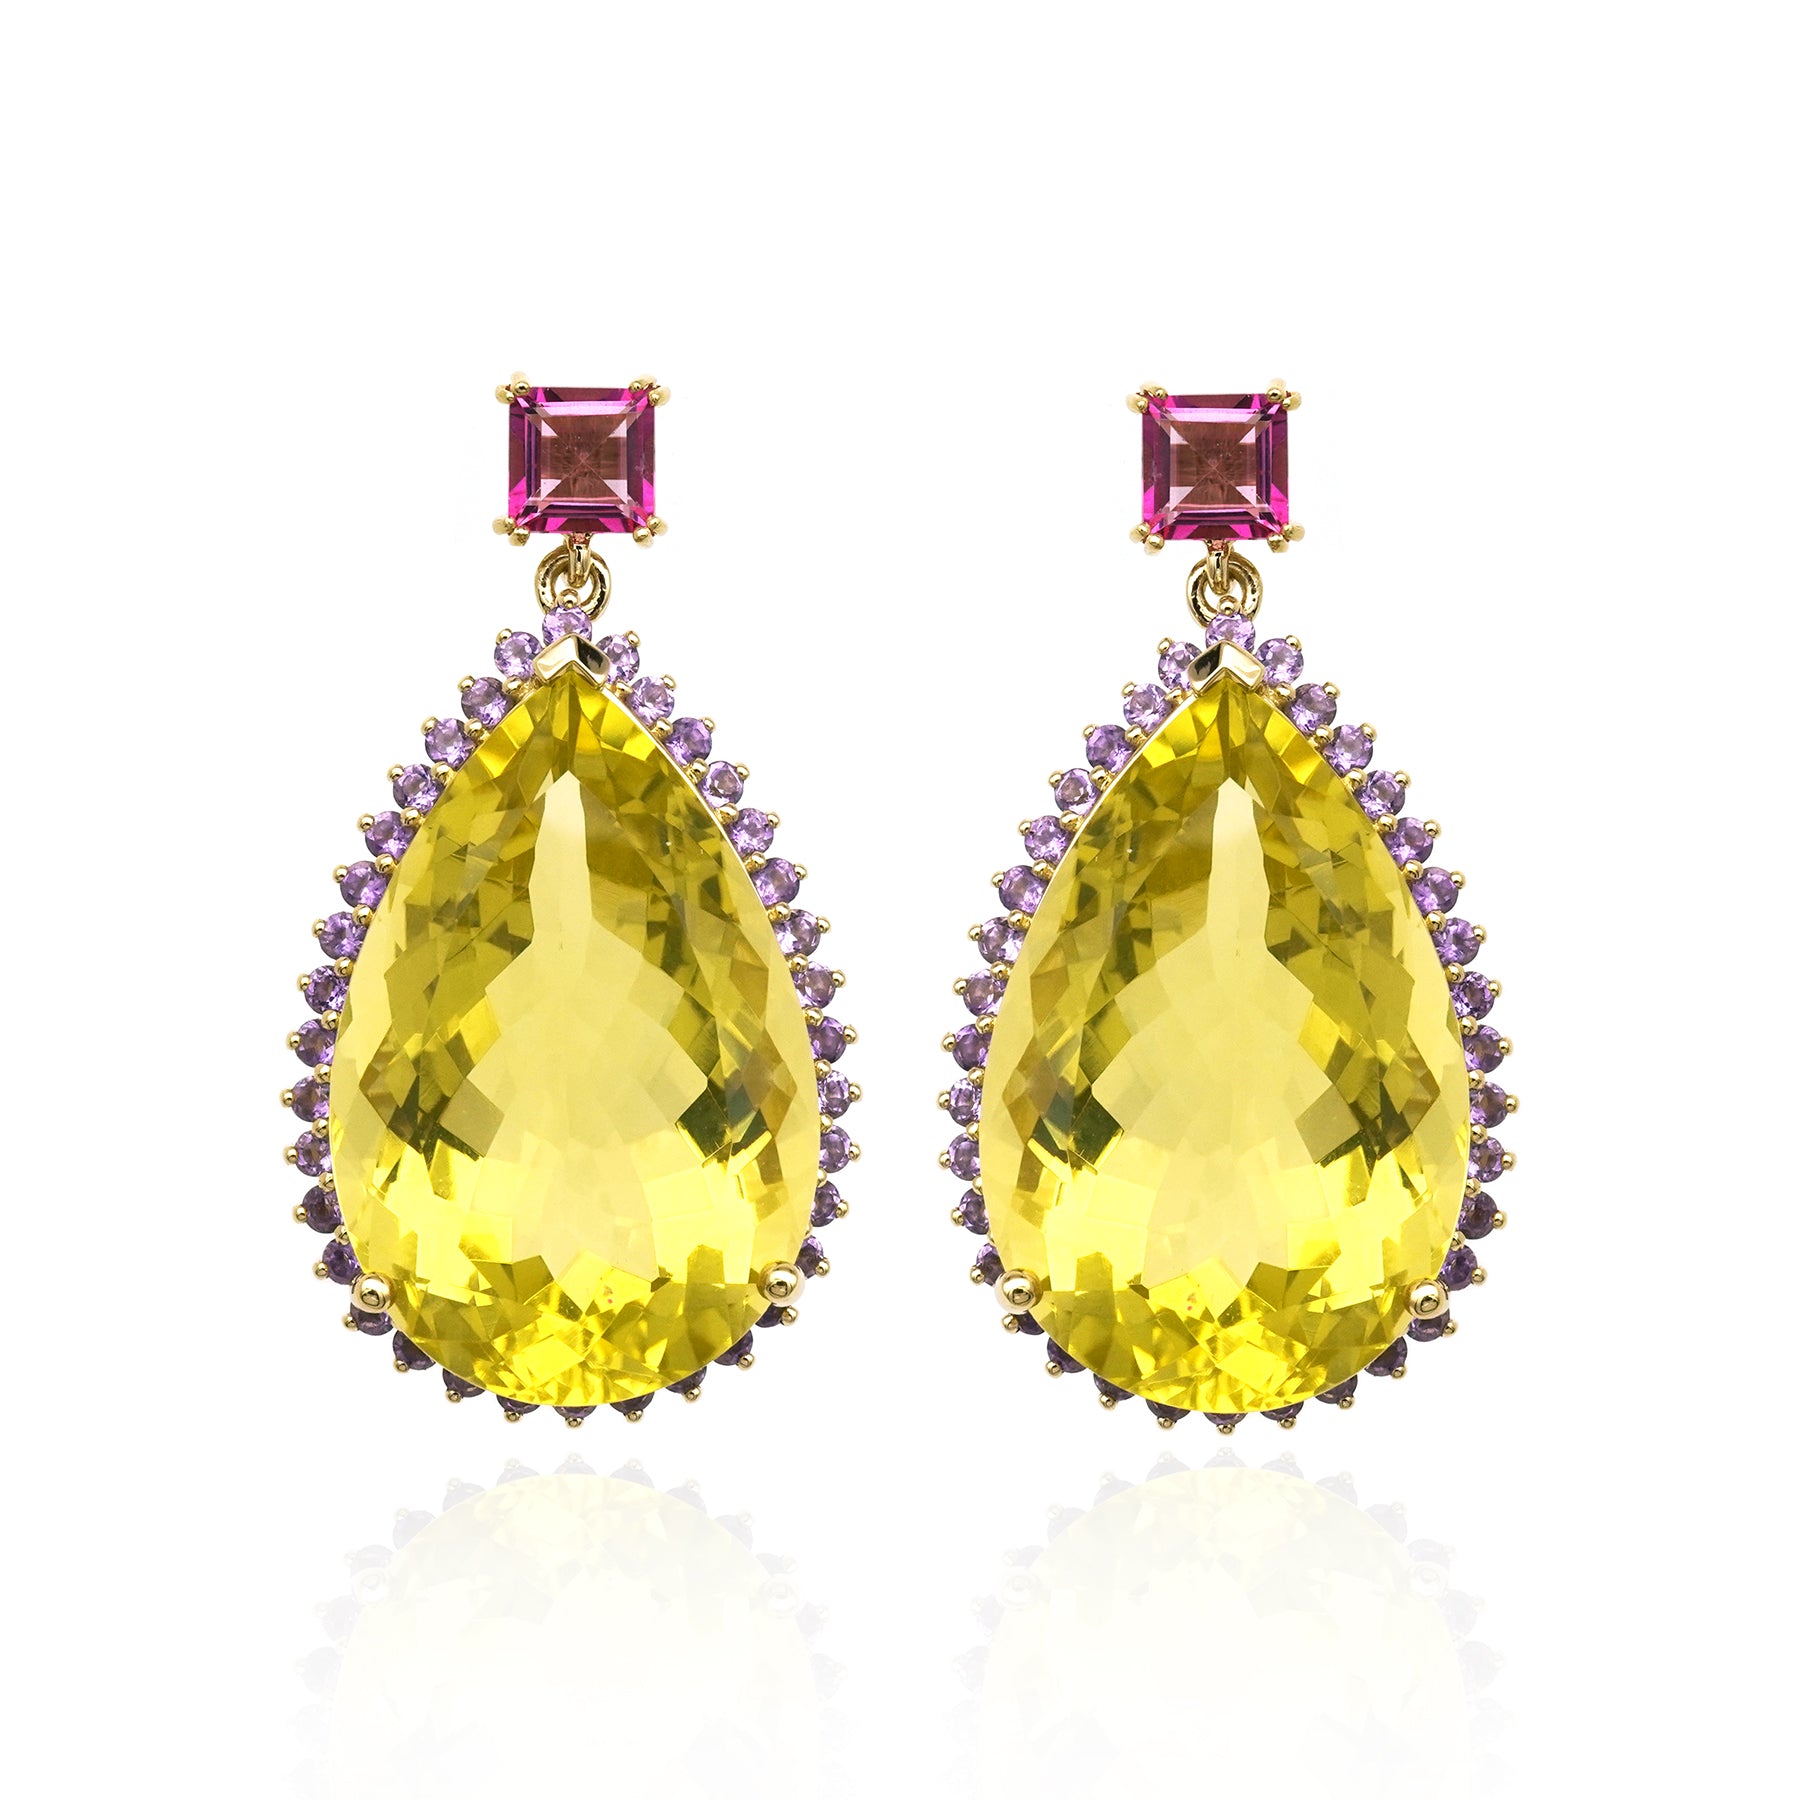 Large cocktail earrings with lemon quartz and amethyst. Drop earrings for special occasions.